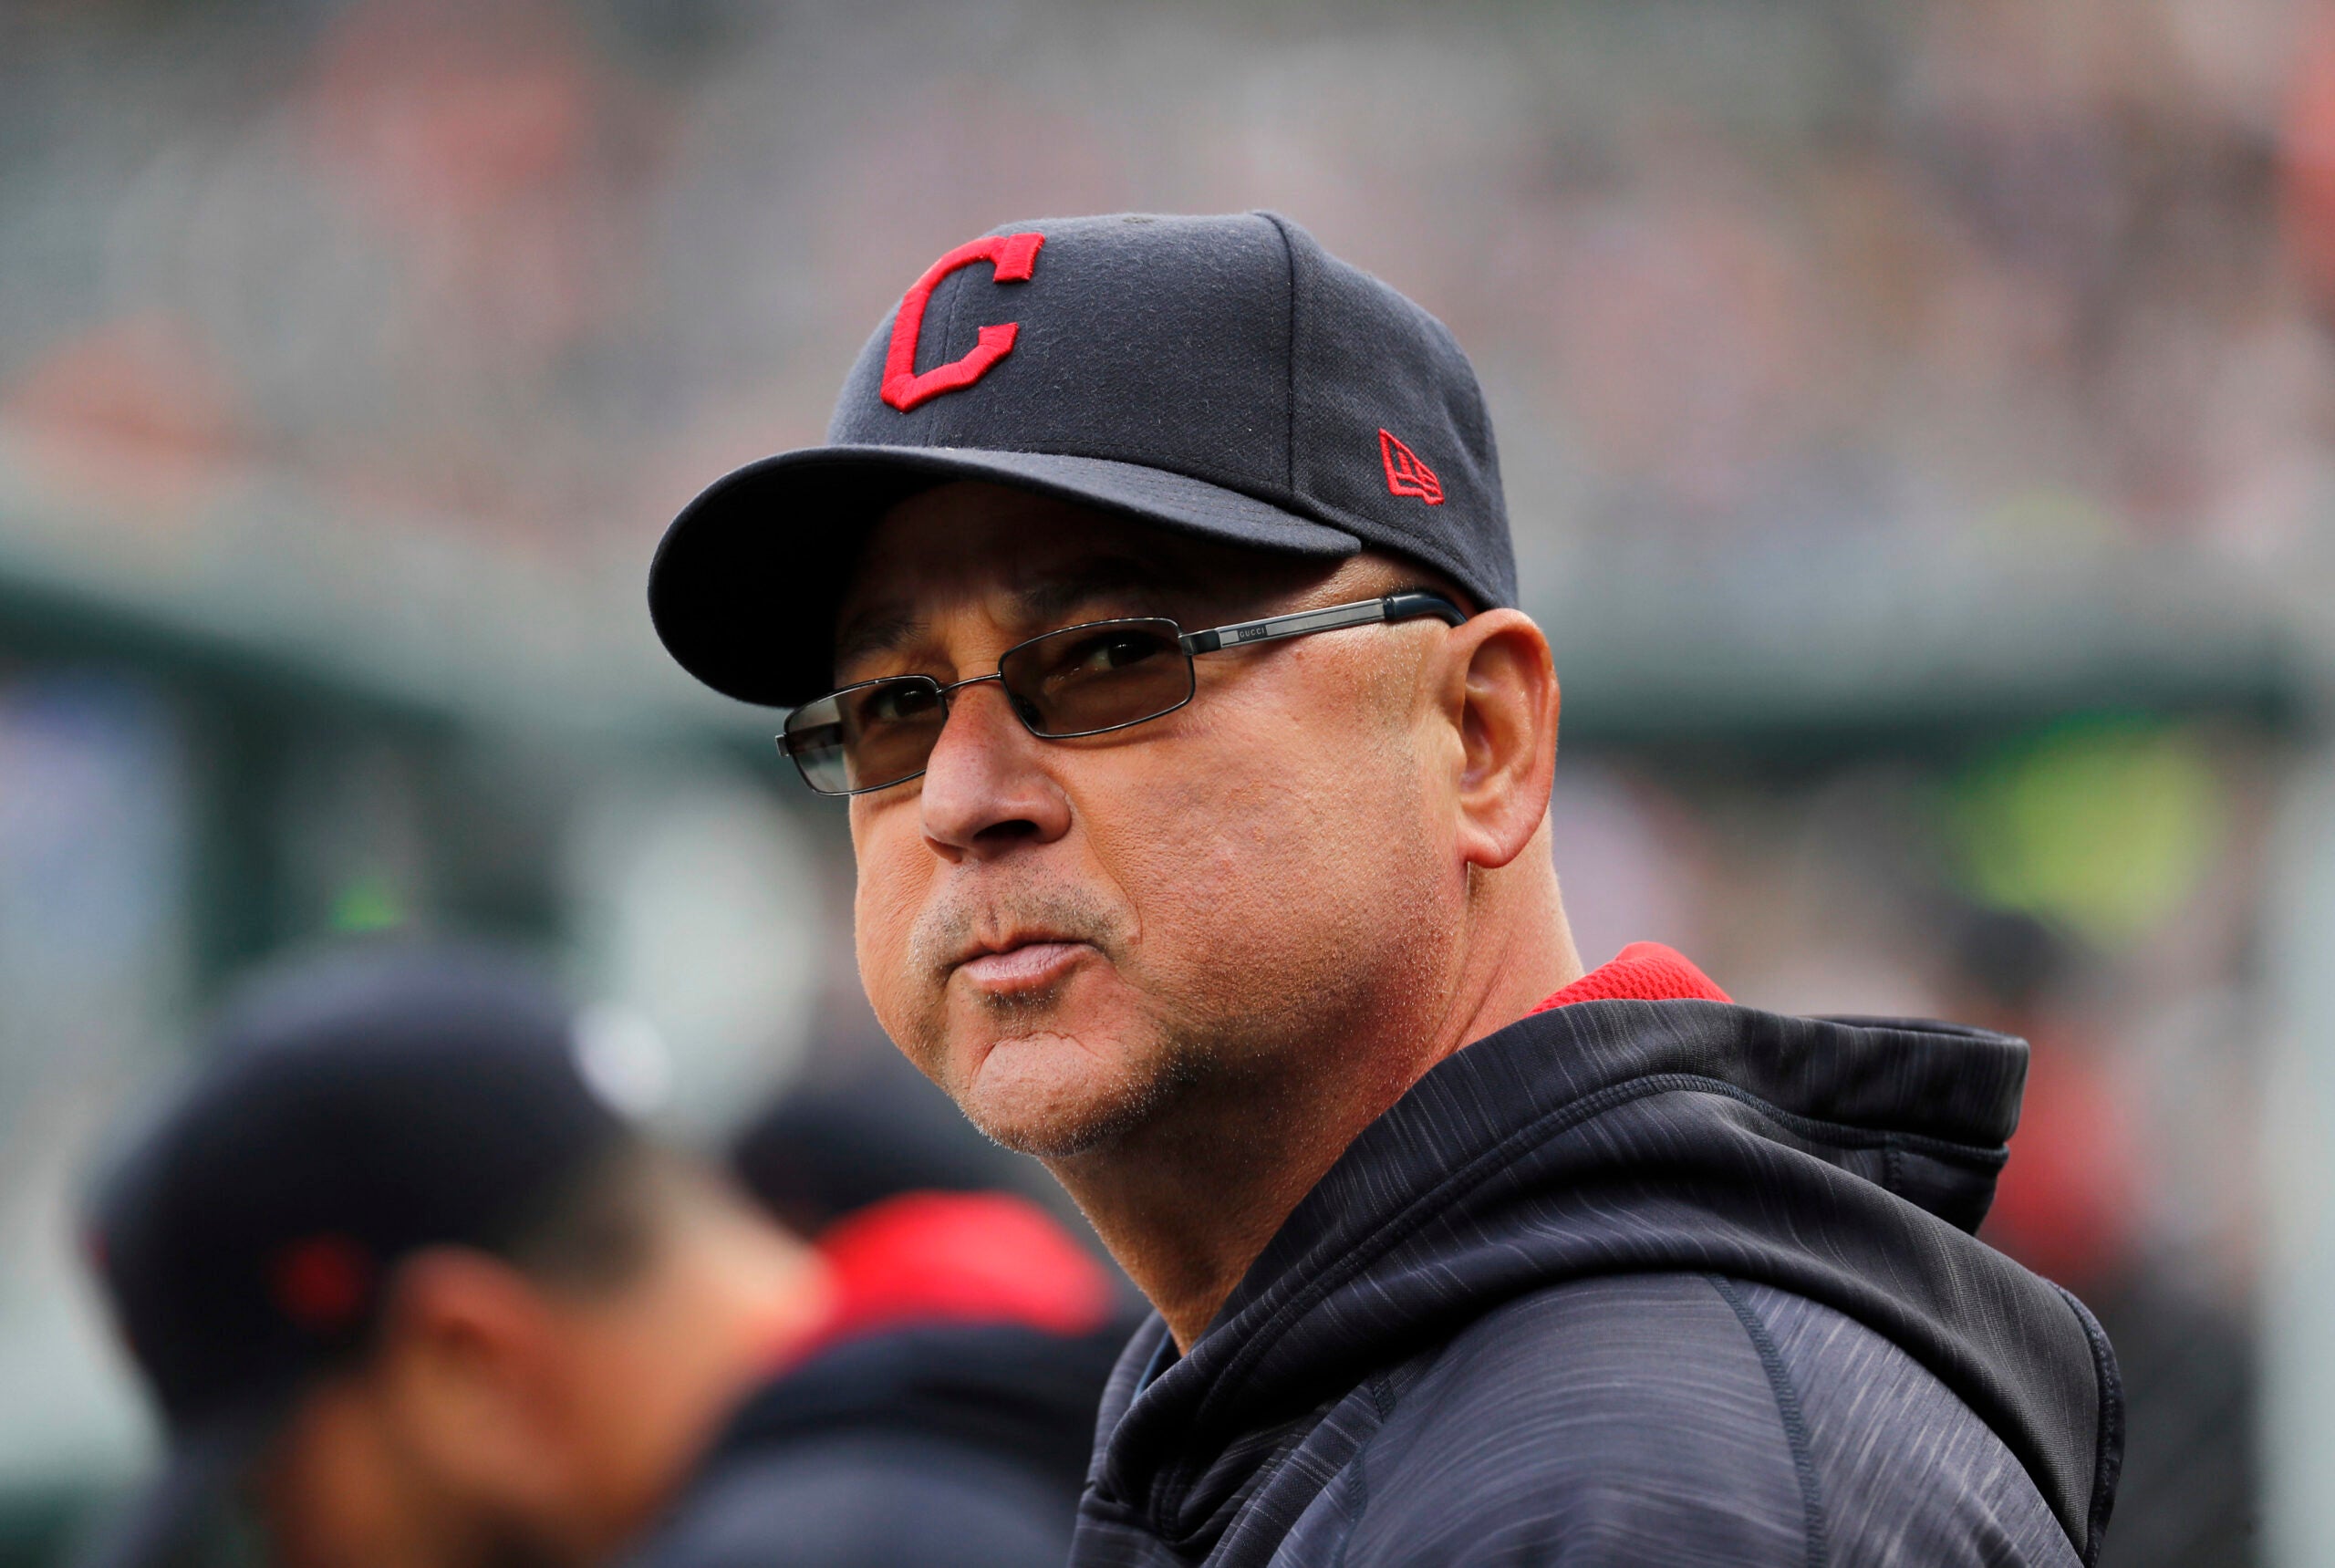 Terry Francona released from hospital, advised to rest - CBS Boston